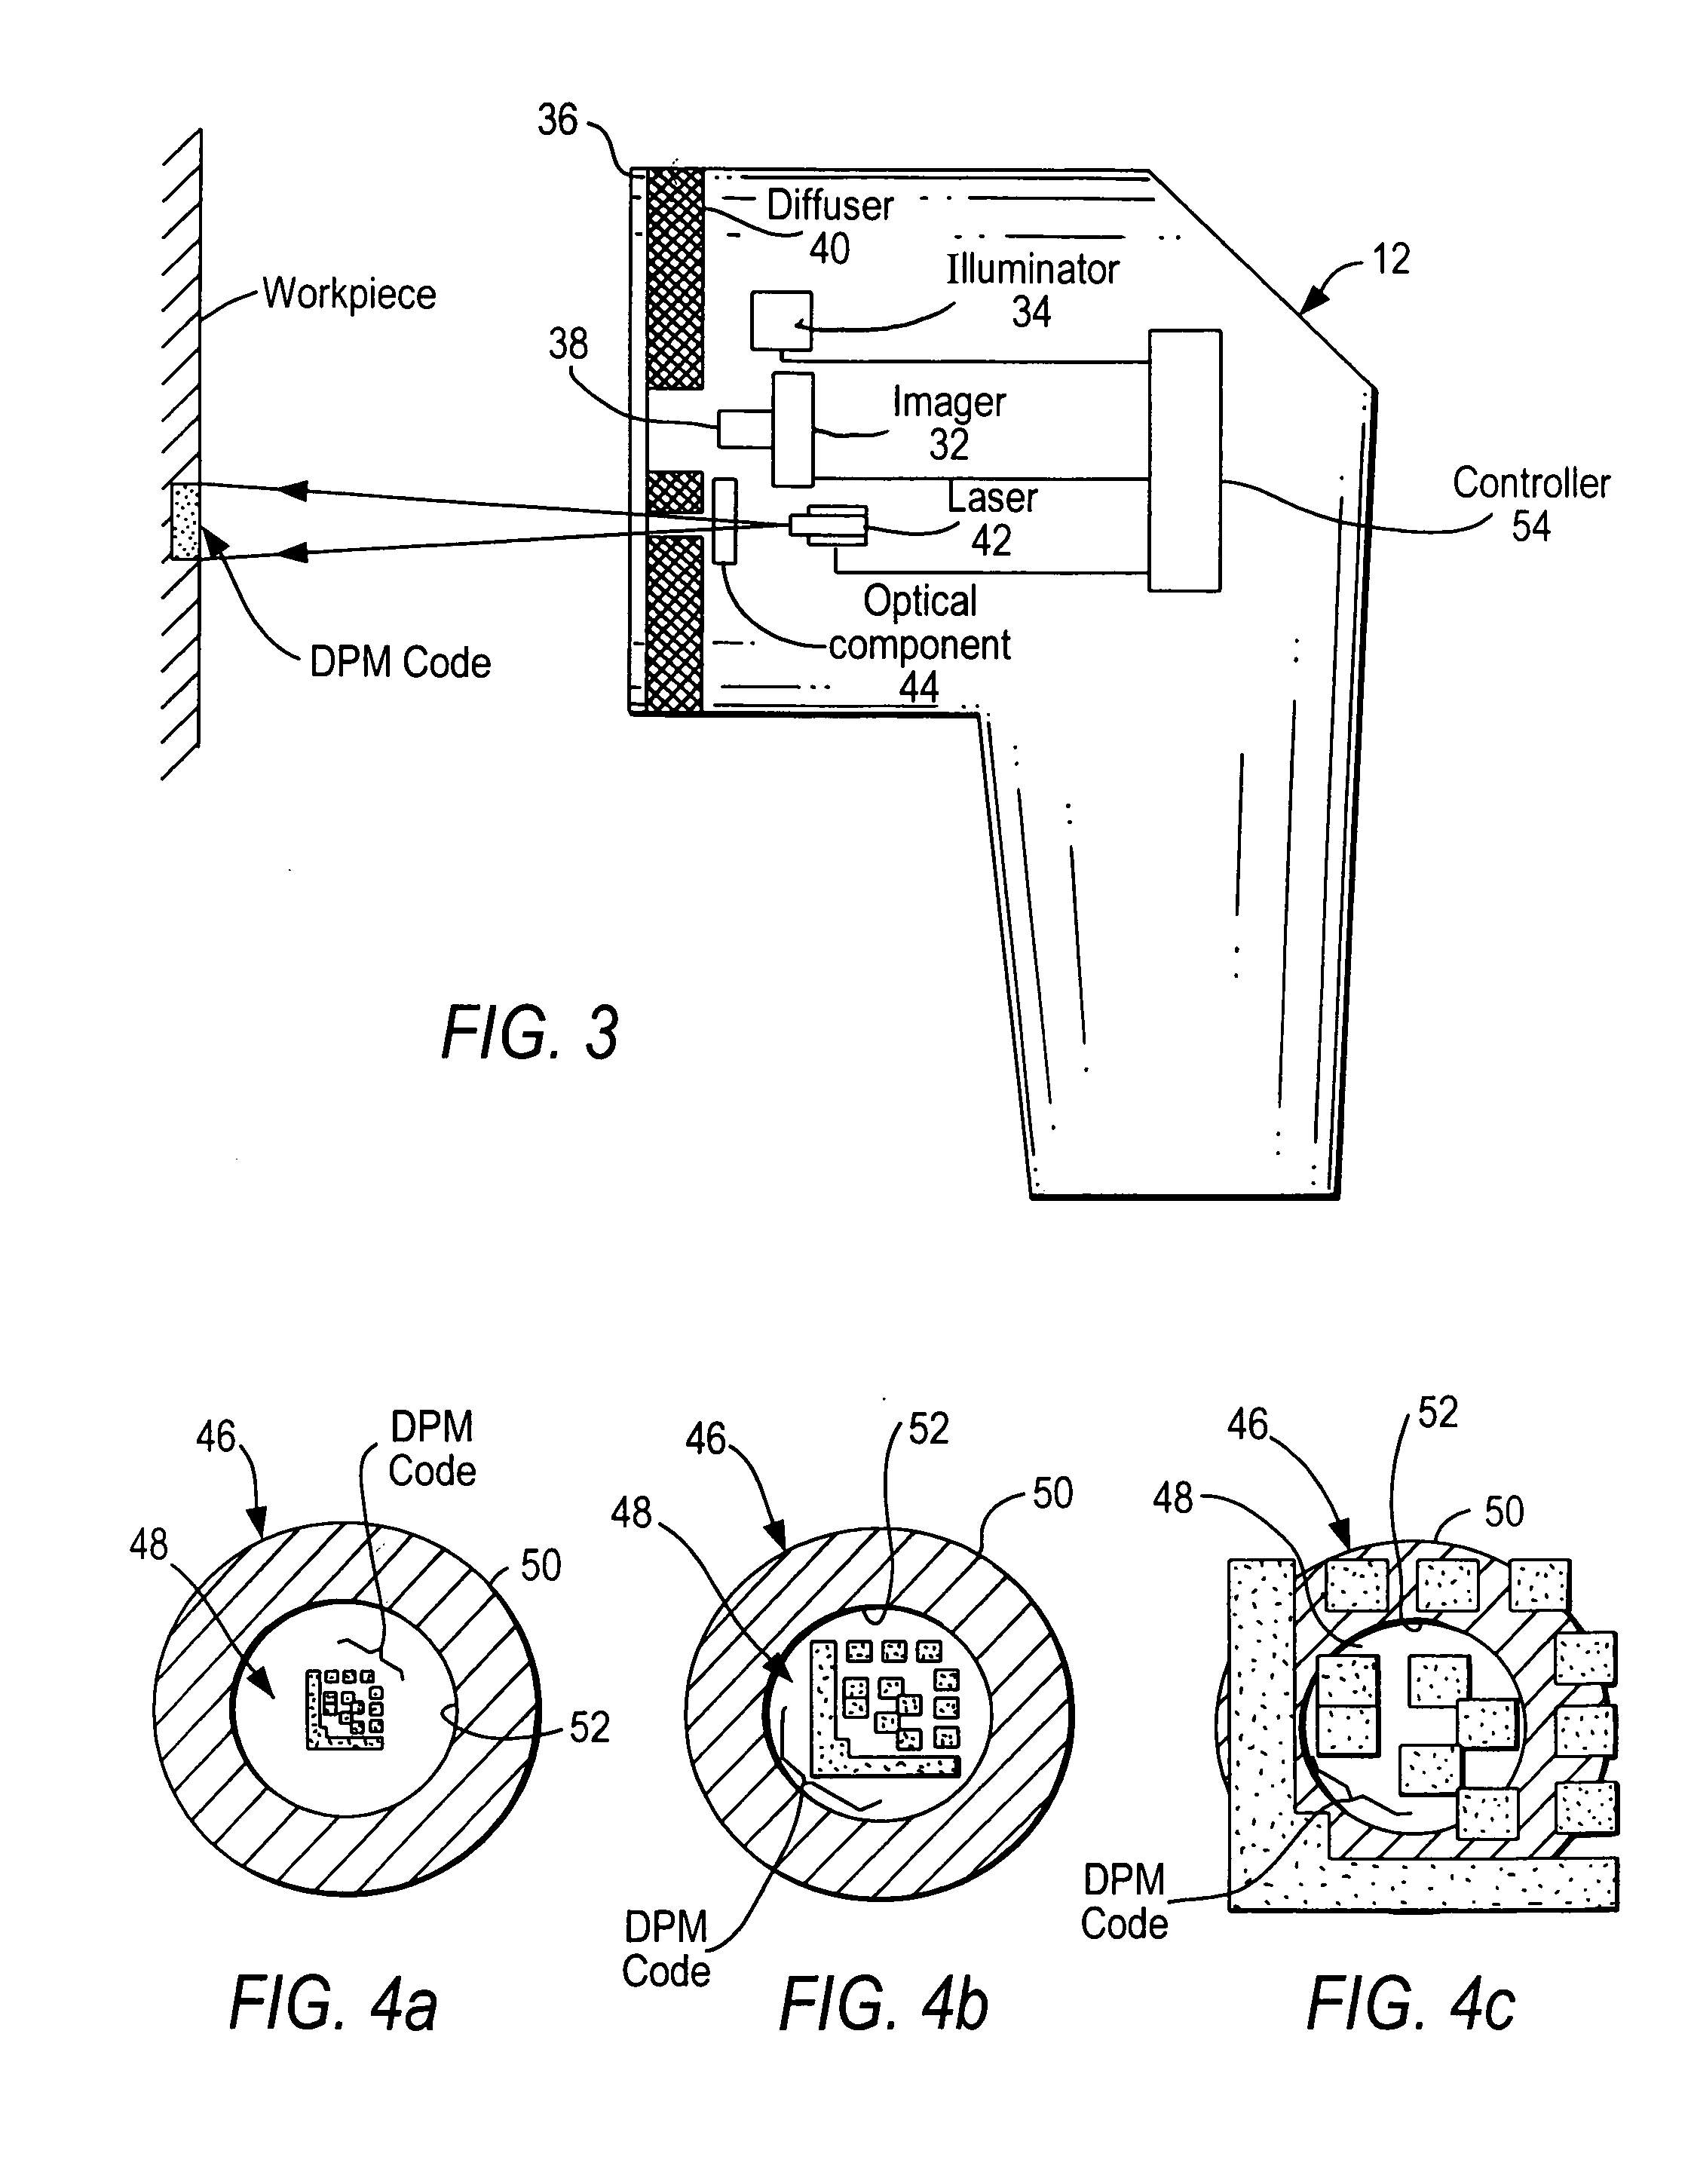 Arrangement for and method of accurately aiming at direct part markings prior to being imaged and electro-optically read